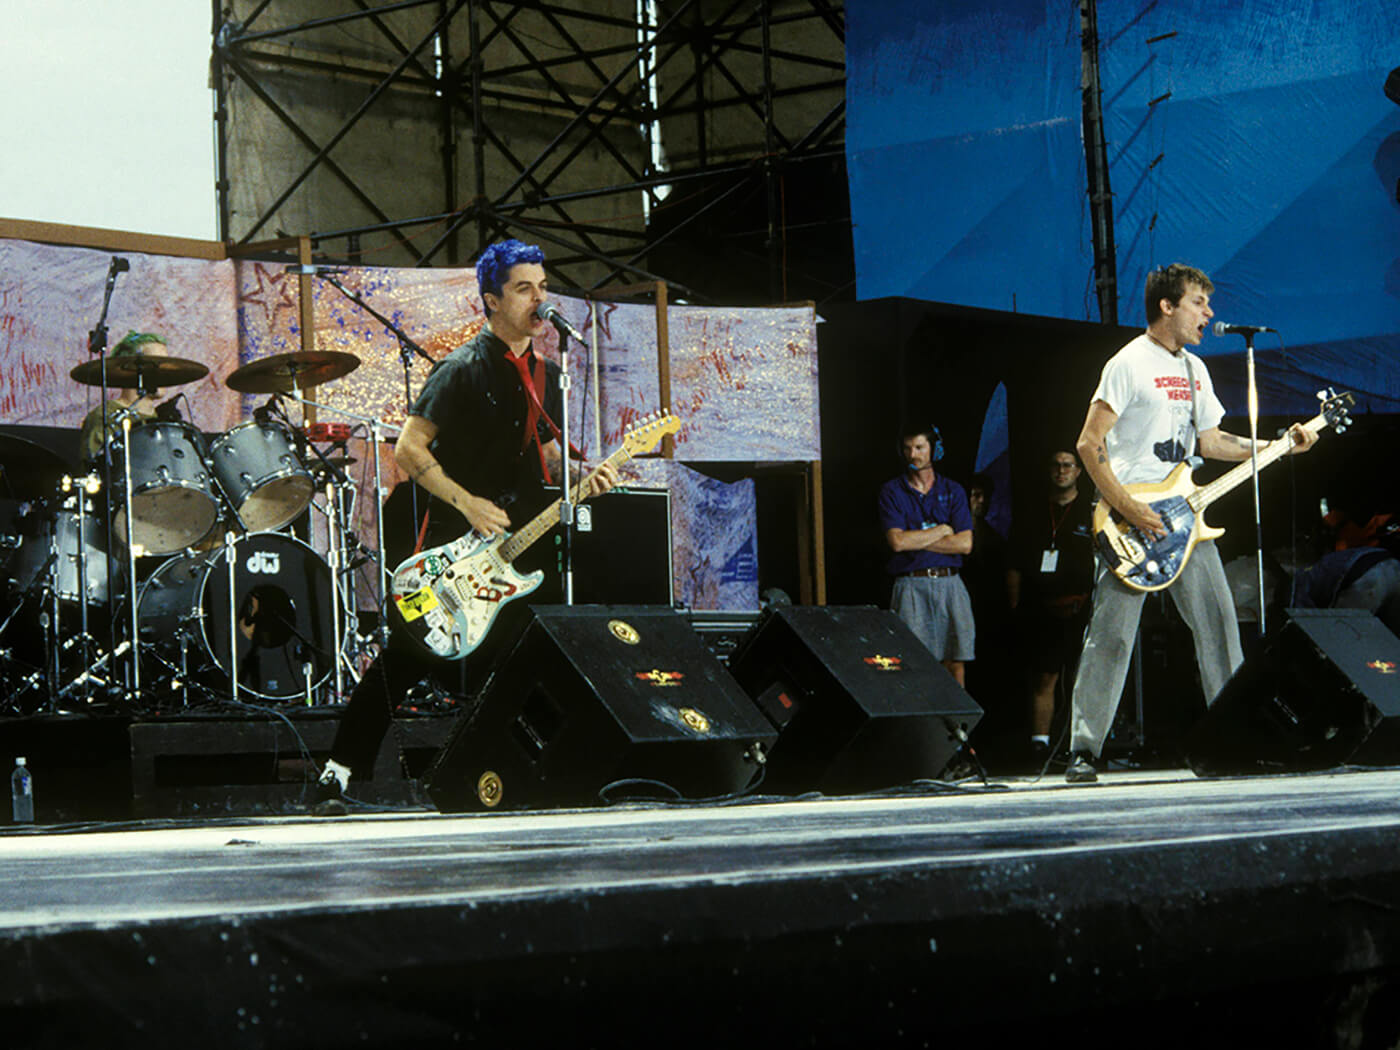 Green Day performing at Woodstock in 1994 by John Lynn Kirk/Redferns via Getty Images